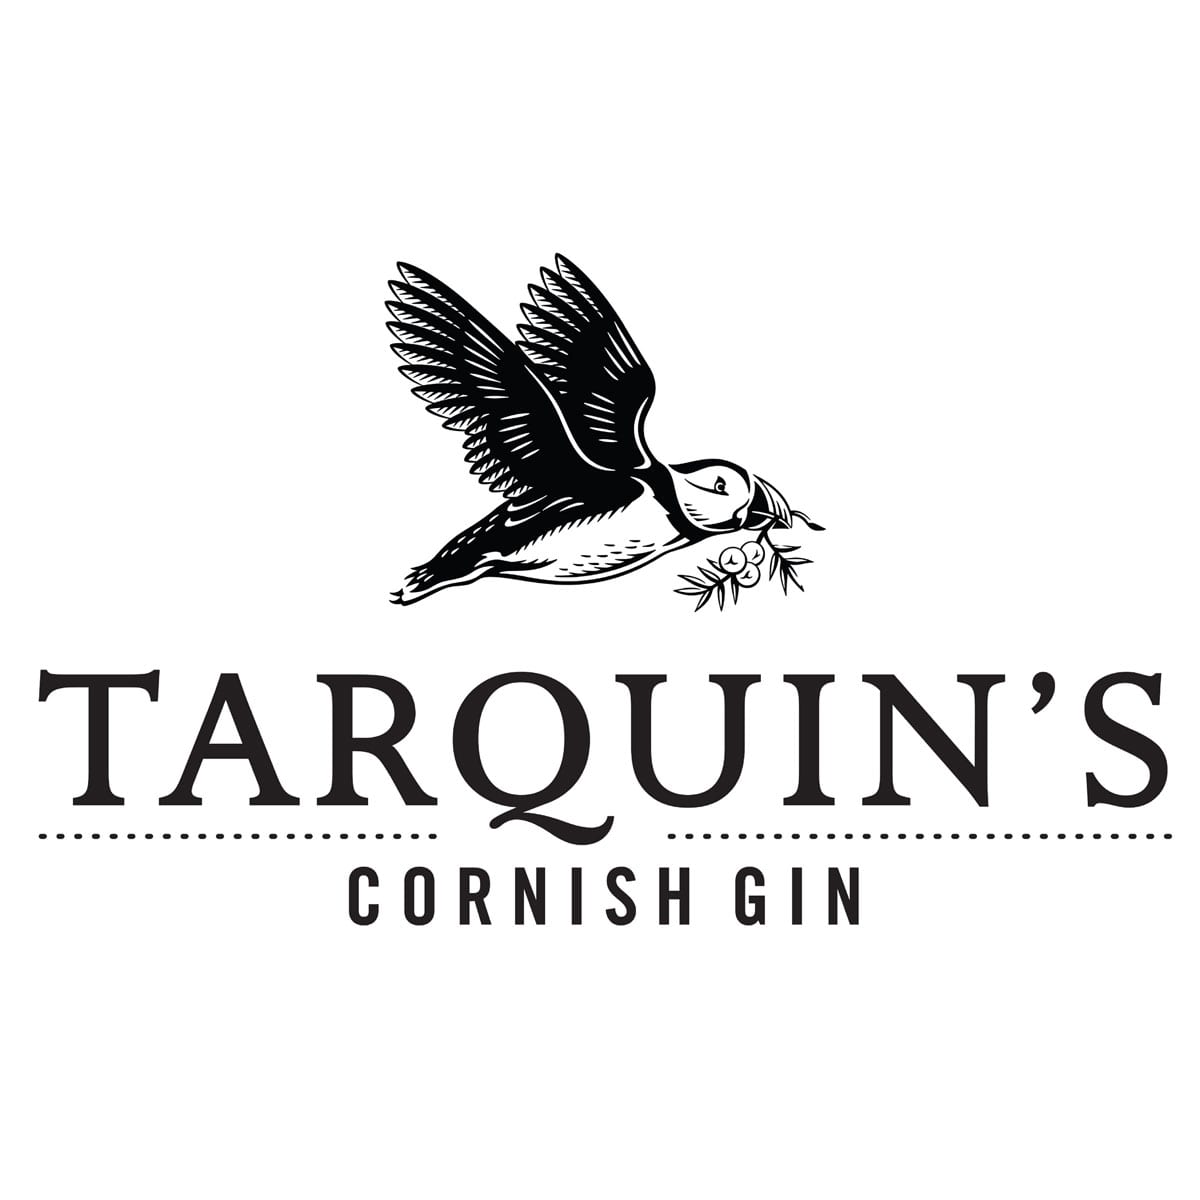 Alt text: Logo of Tarquin's Cornish Gin featuring an illustrated puffin in flight carrying a sprig, with bold text "TARQUIN'S" above and "CORNISH GIN" below.